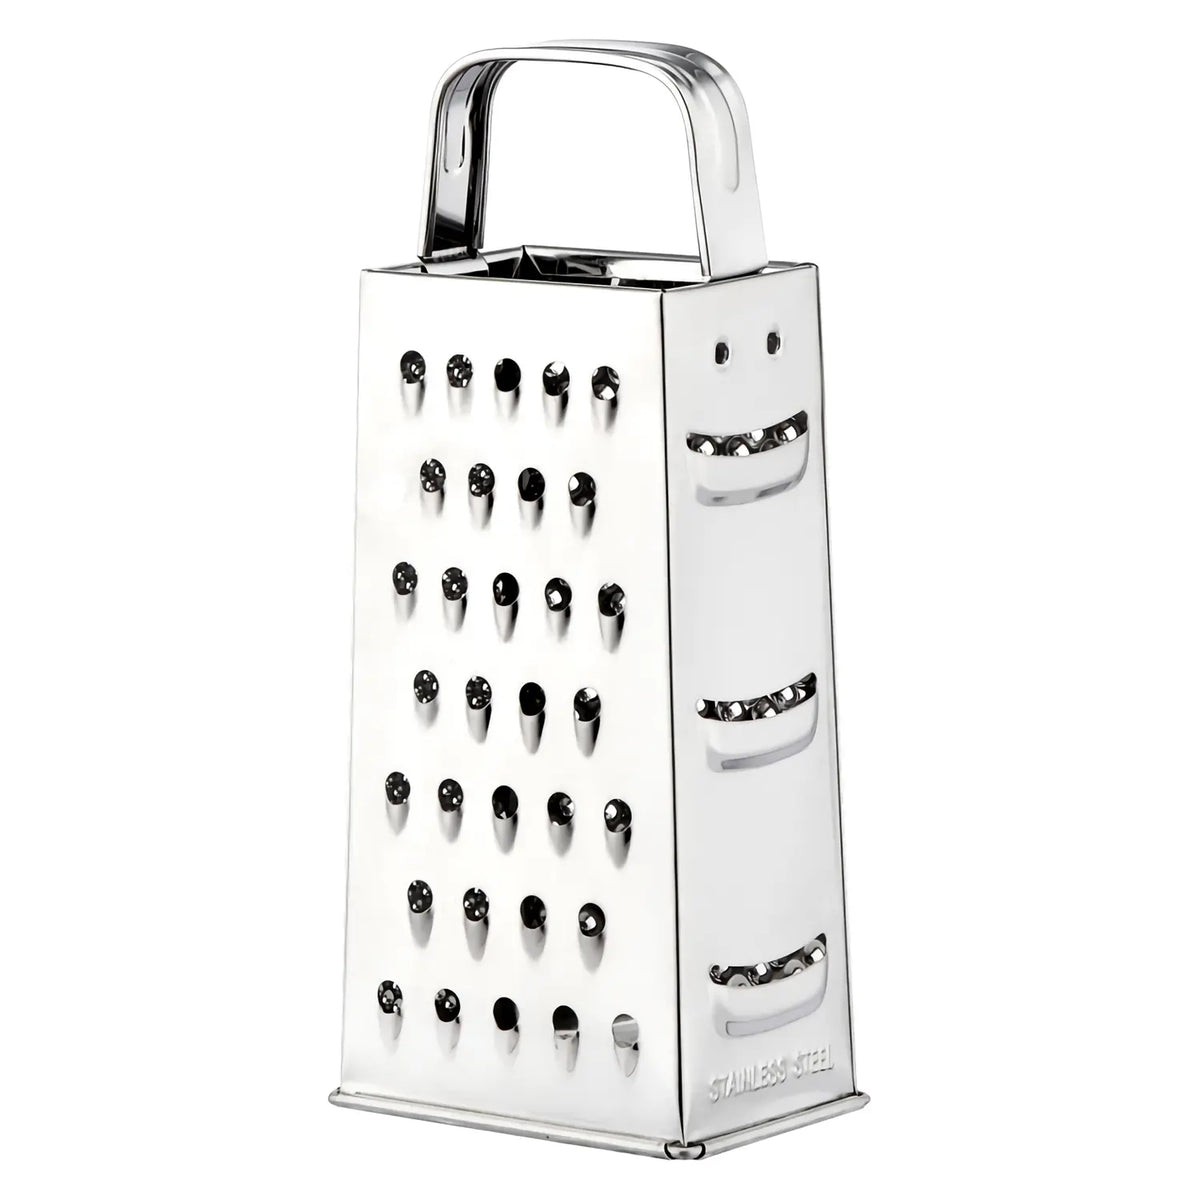 Stainless Steel Cheese Grater With Container Store Two-Sided Fruit